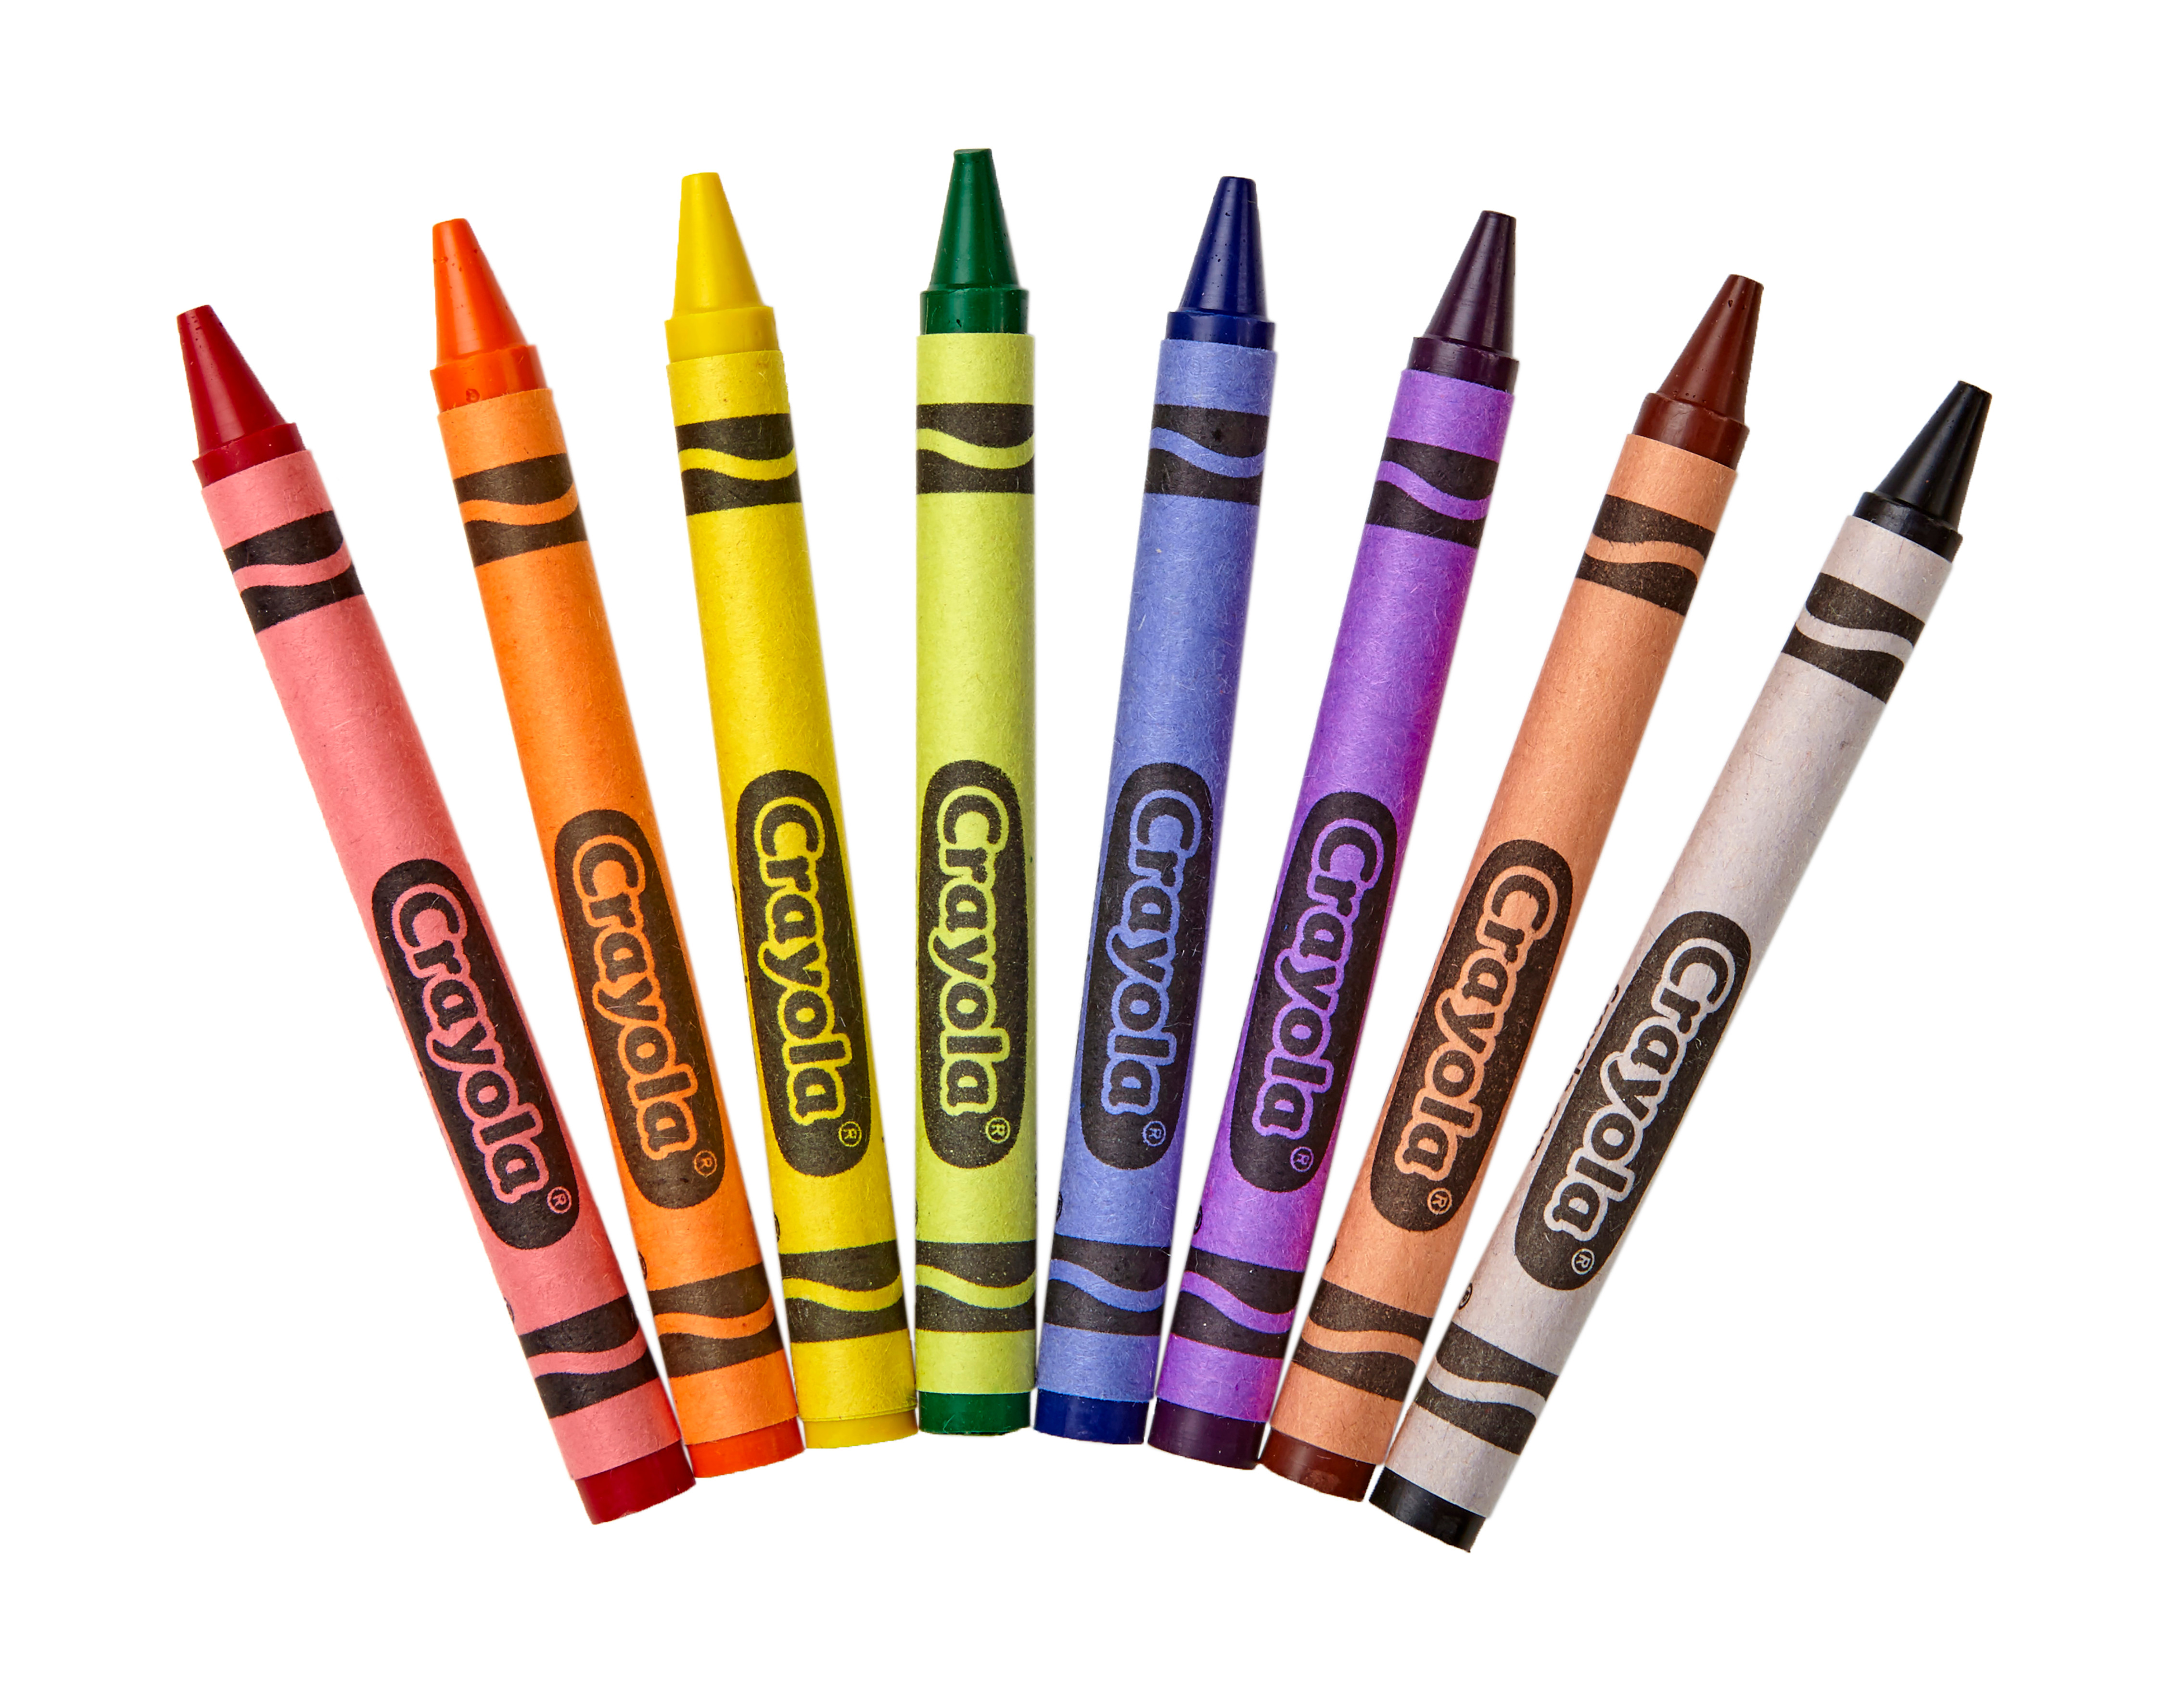 Crayola Classic Crayons, Back to School Supplies for Kids, 8 Ct, Art Supplies - image 4 of 10